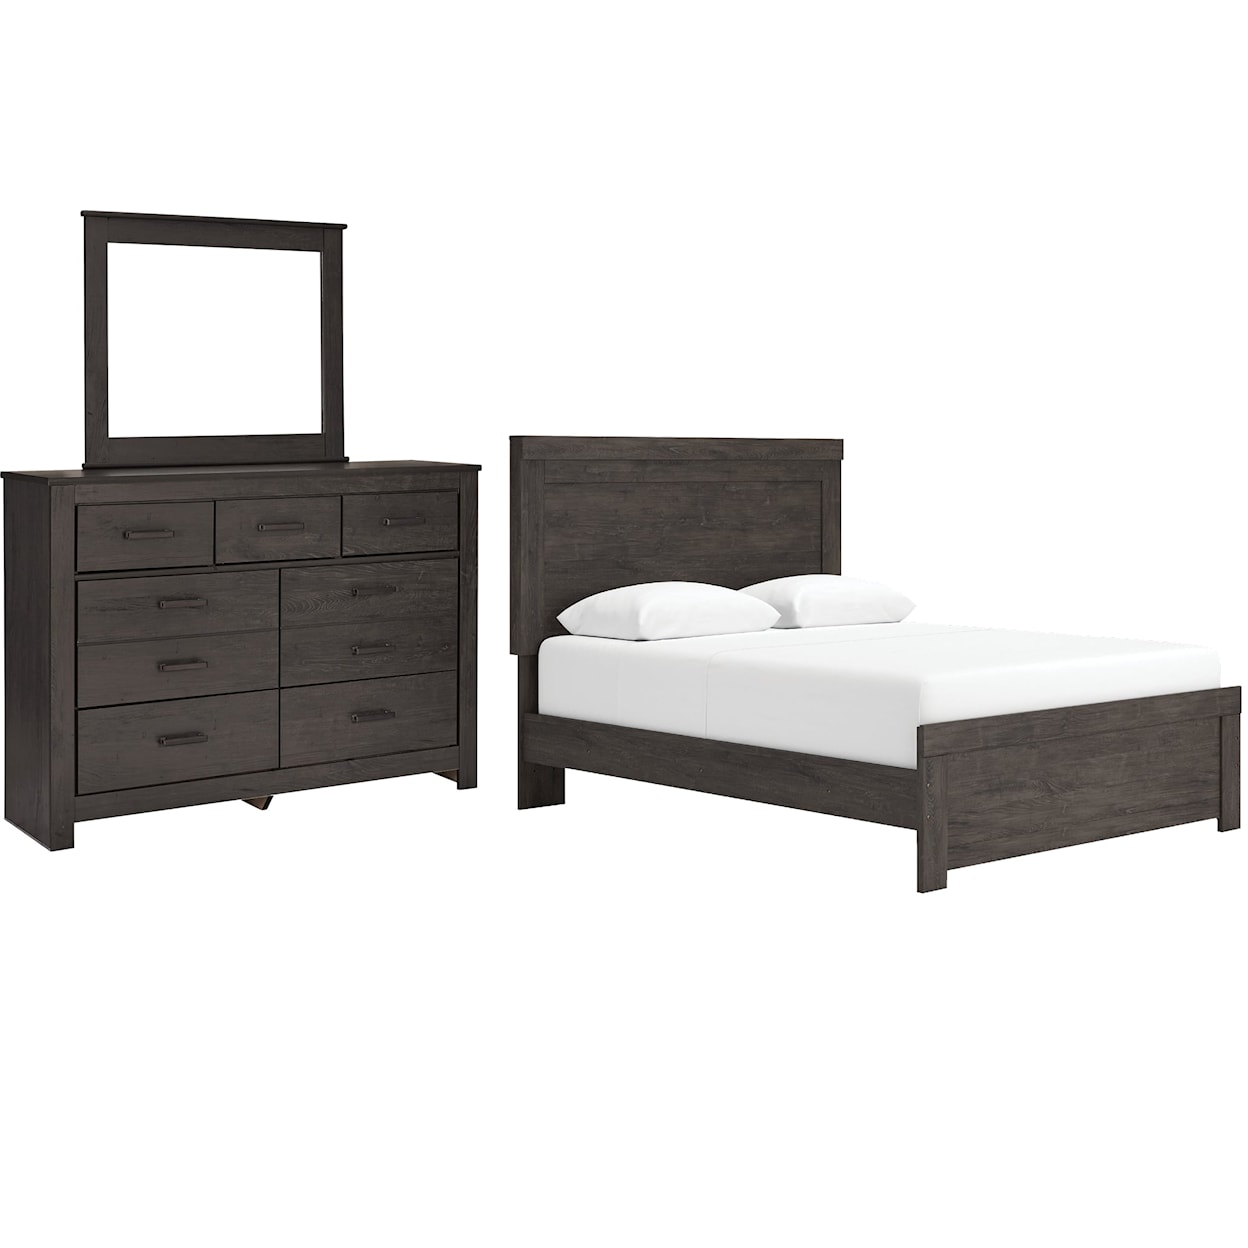 Ashley Furniture Ashley Furniture Queen Bedroom Group